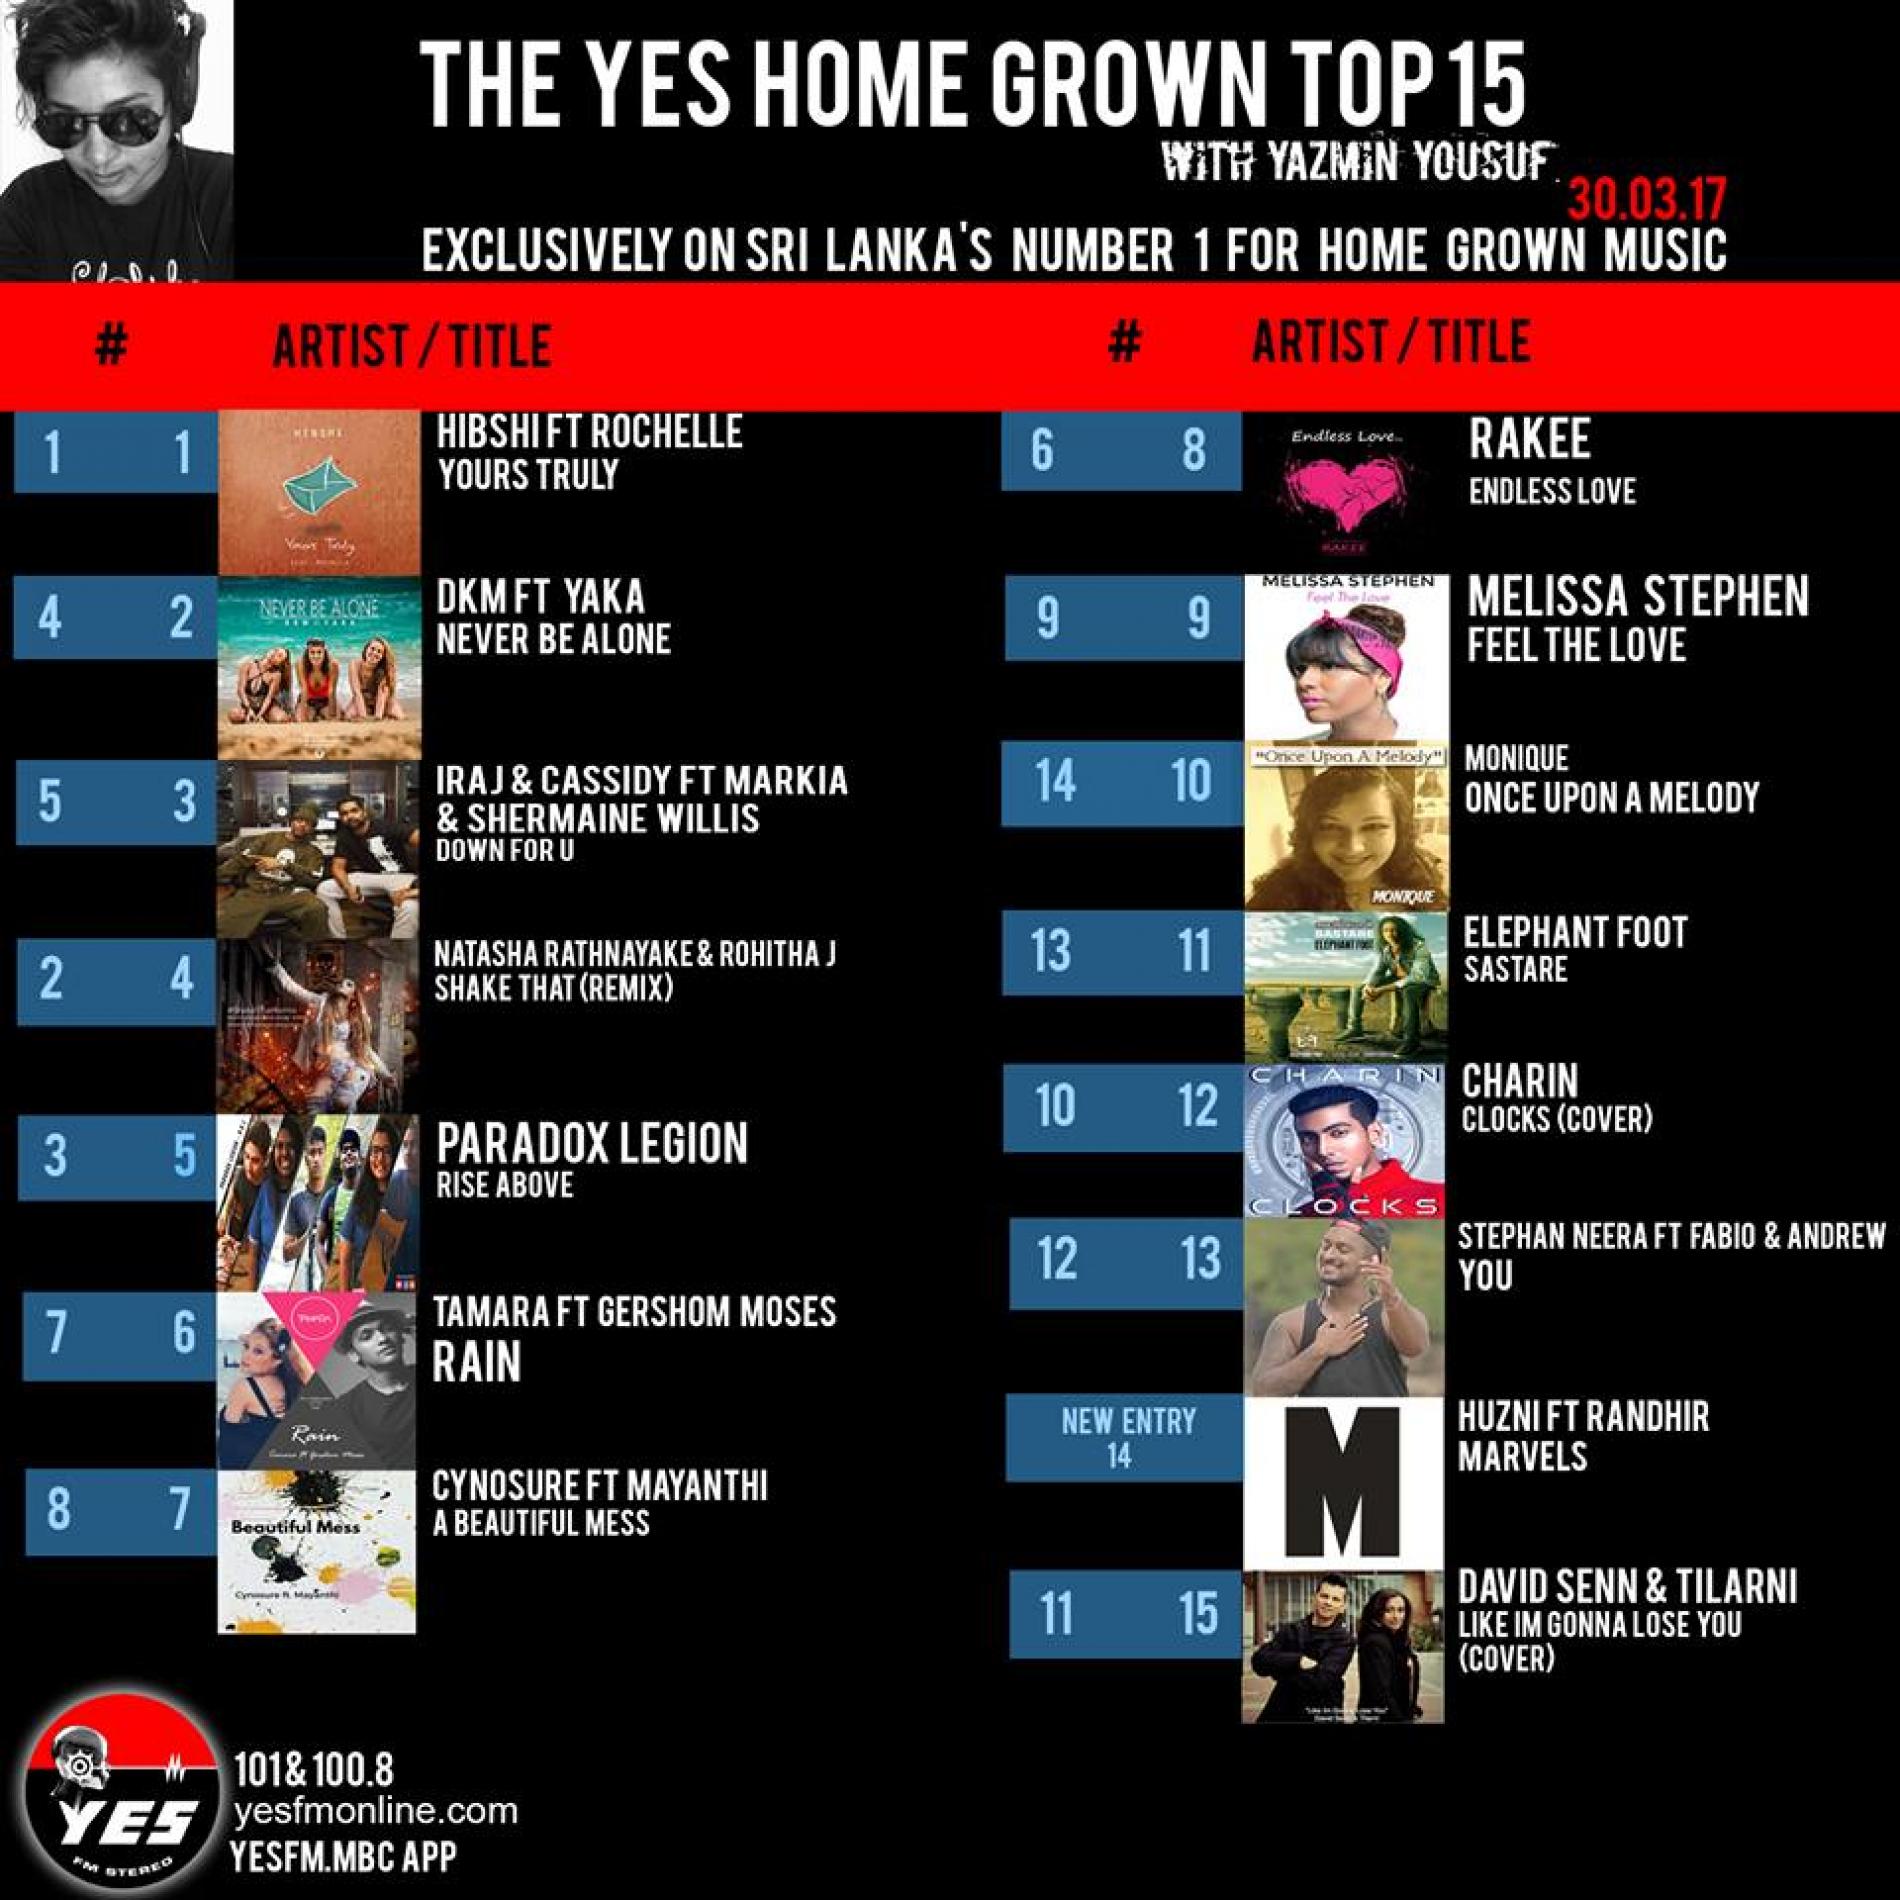 Hibshi & Rochelle Set An All New YES Home Grown #1 Record